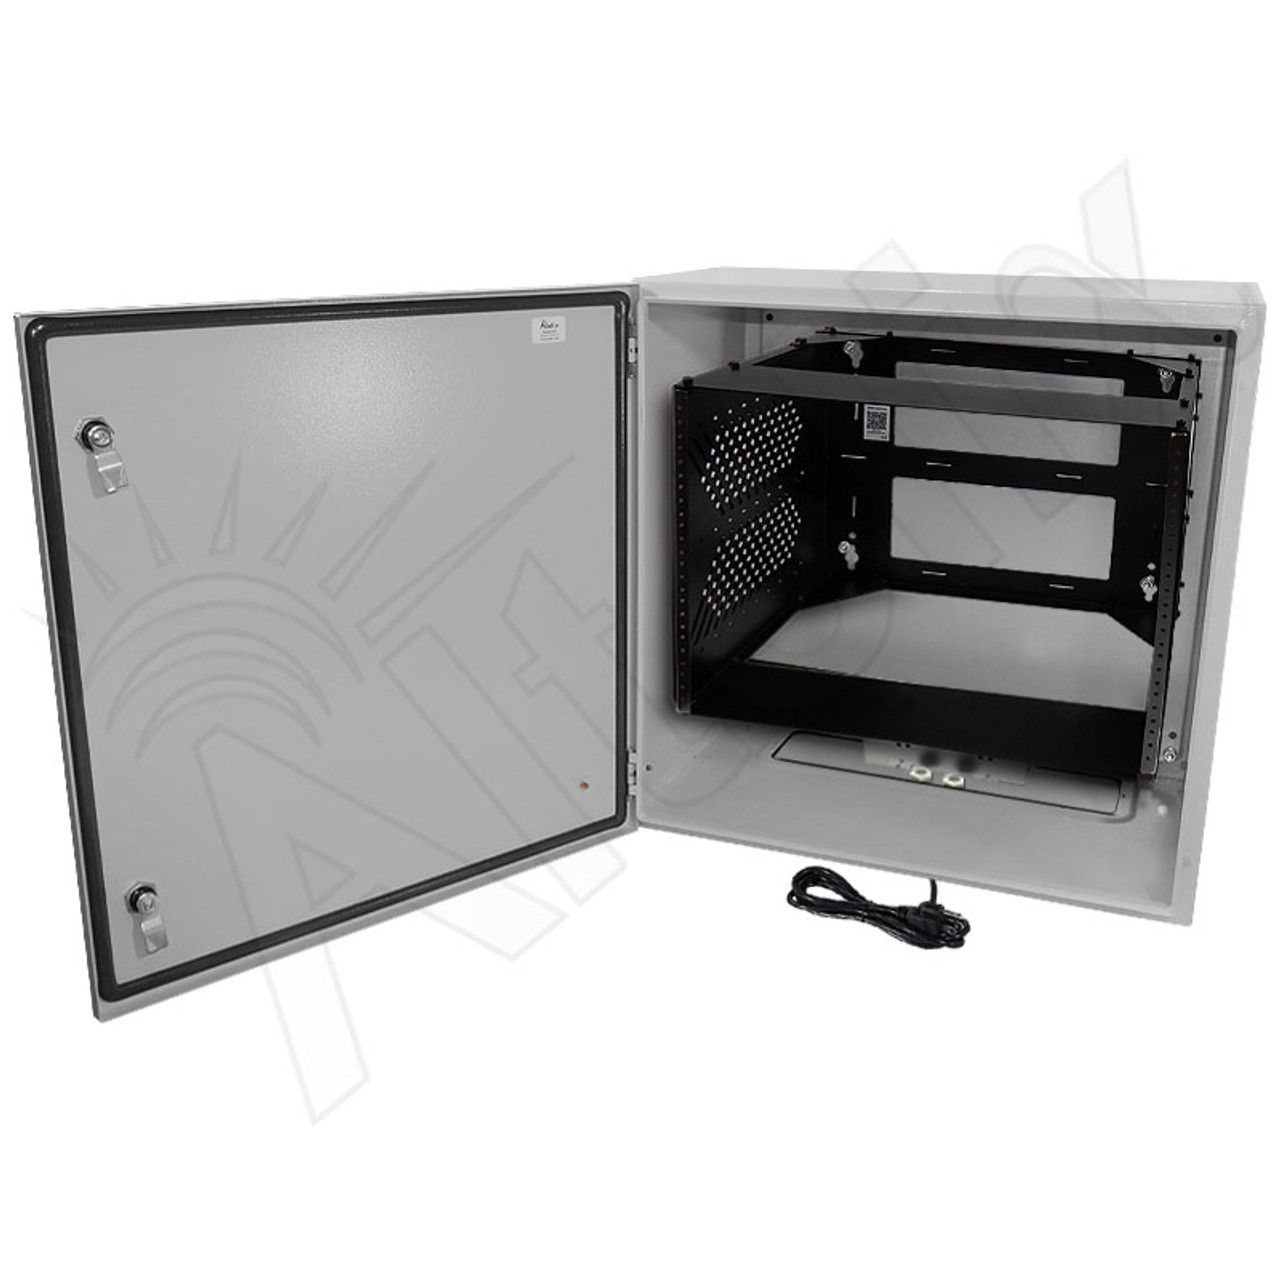 Altelix Cable Management Raceway - Steel 1U 19 Wire Manager with 12 Cable  Slots and Removable Cover - Altelix